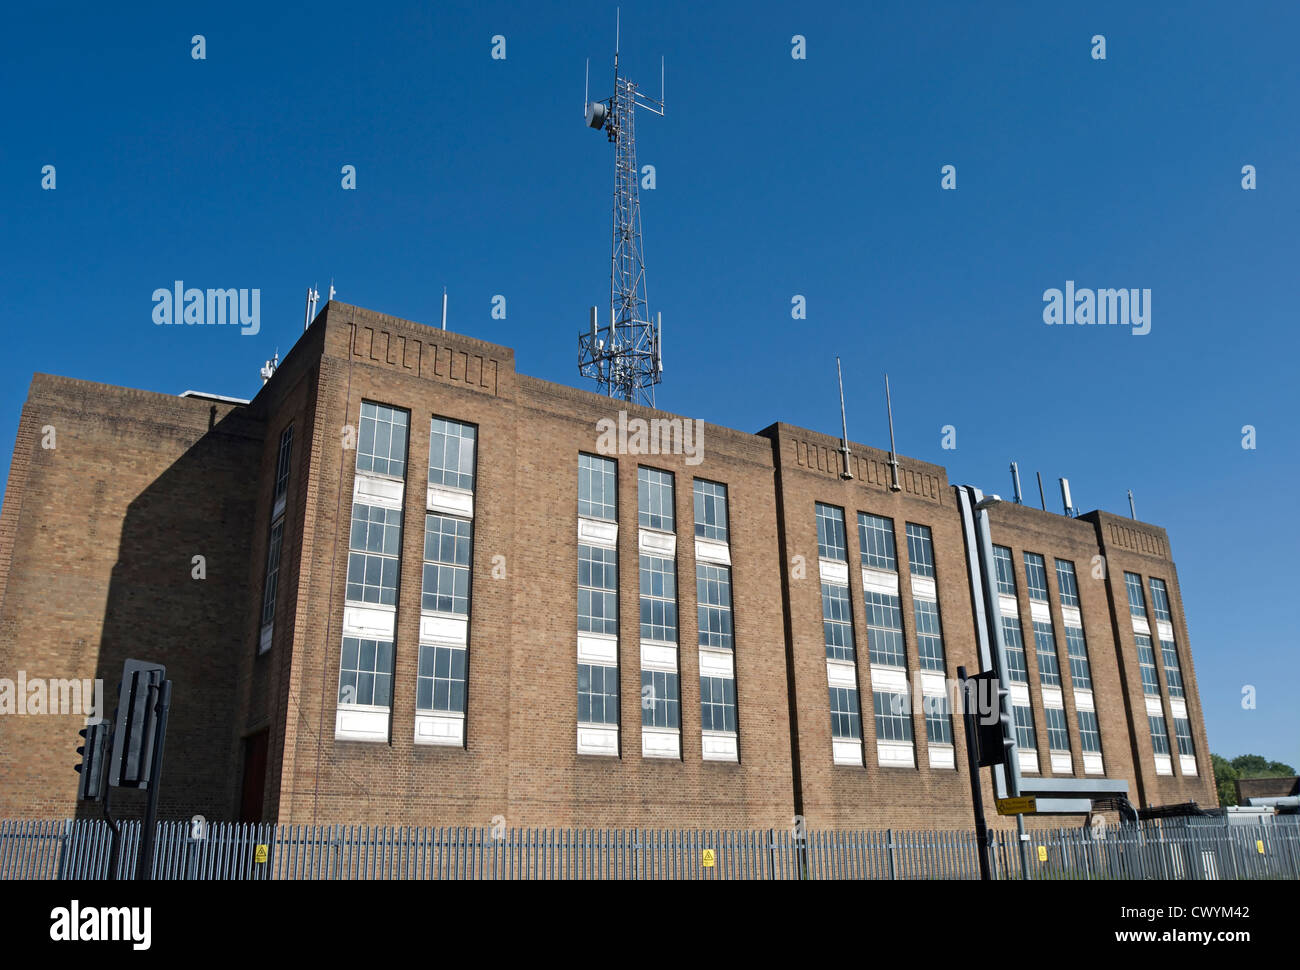 electricity substation with mobile phone mast on roof, hayes, middlesex, england Stock Photo